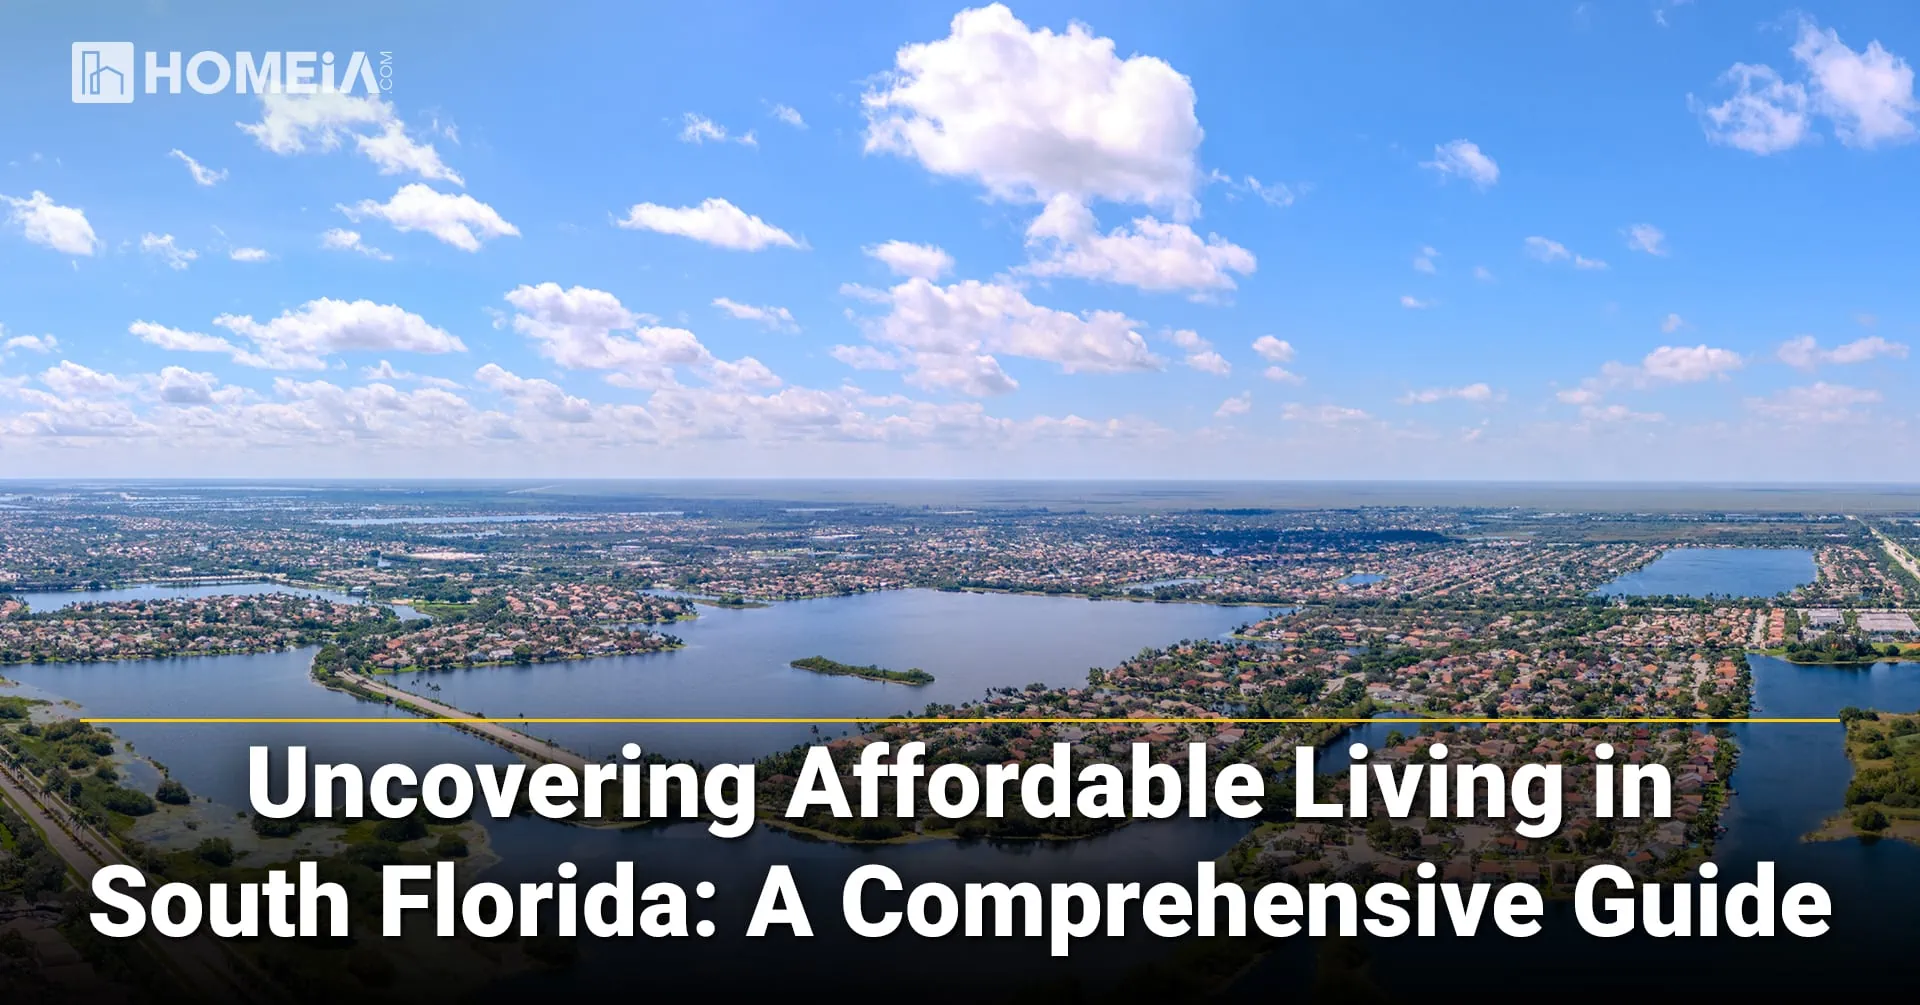 Uncovering Affordable Living in South Florida: A Comprehensive Guide